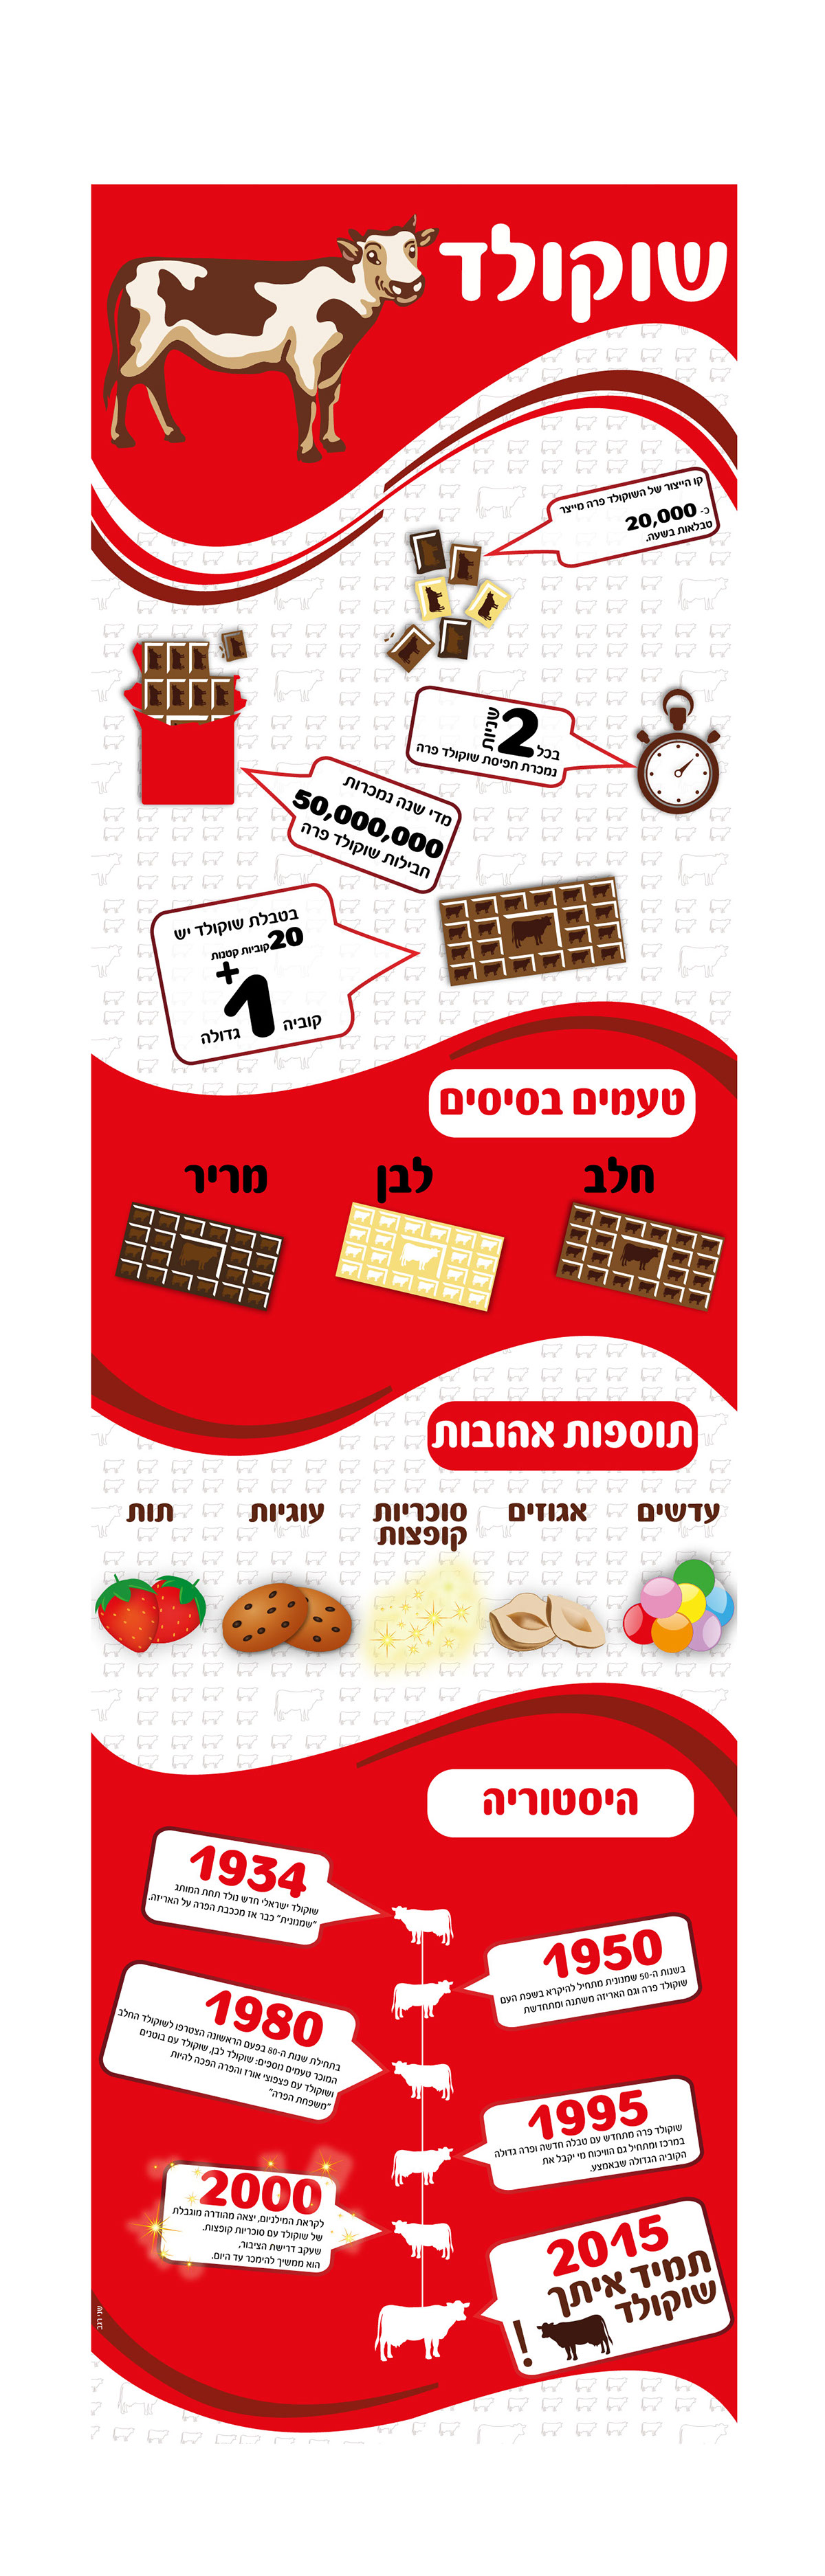 israeli cow chocolate infographic red cow chocolate White brown israel